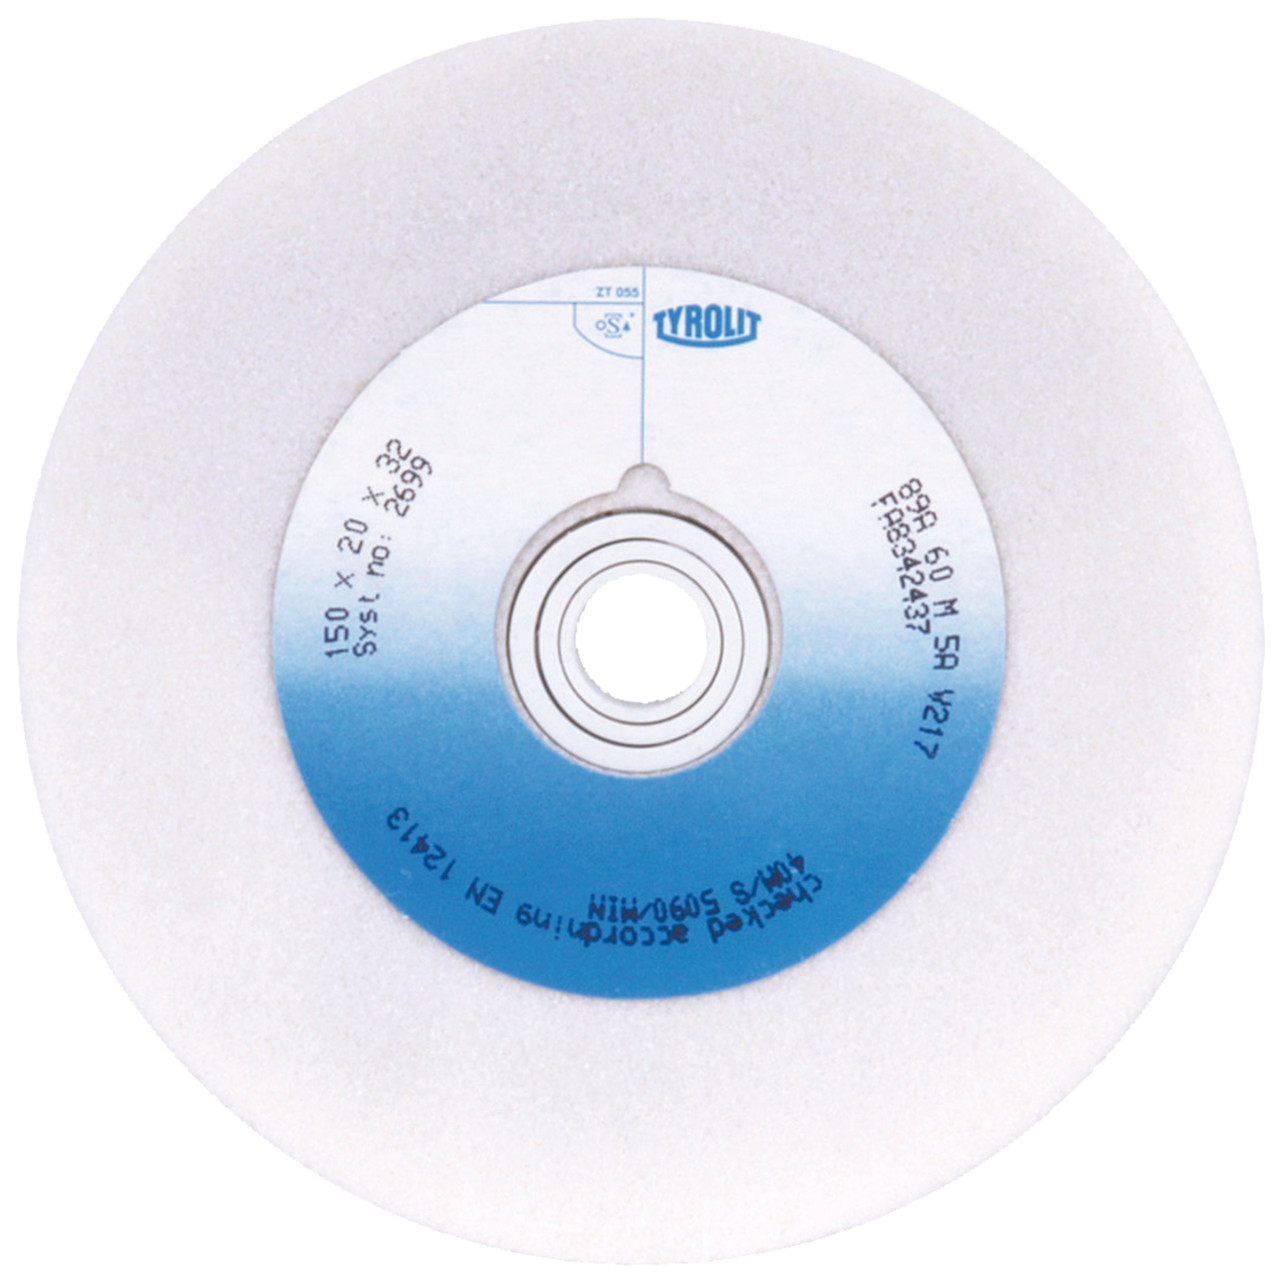 Tyrolit Conventional ceramic grinding discs DxDxH 200x20x32 For high-alloy steels and HSS, shape: 1, Art. 3145